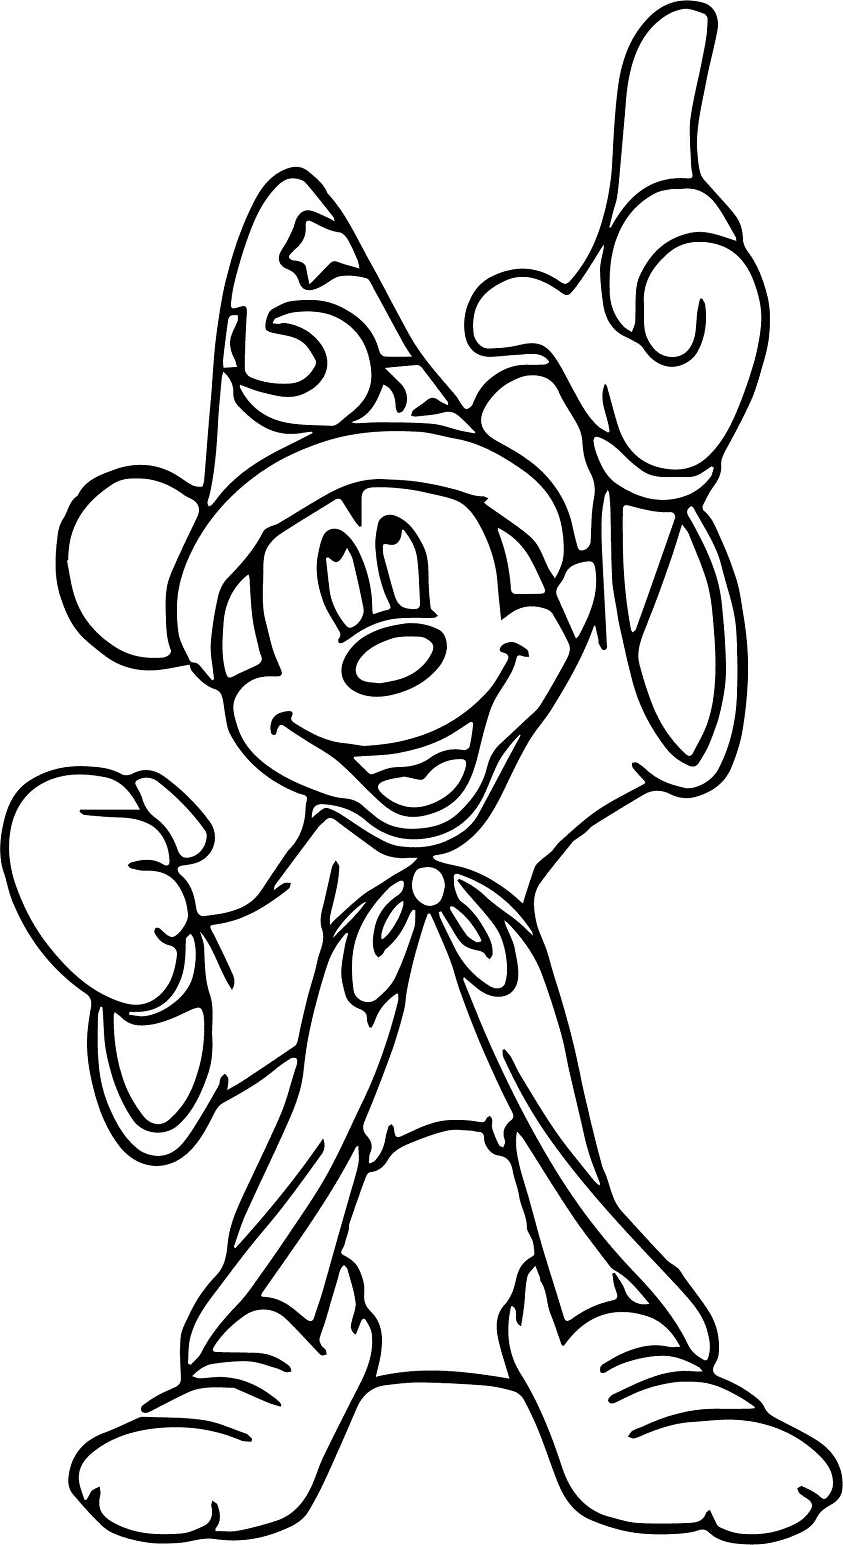 Awesome Mickey Fantasia Coloring Pages